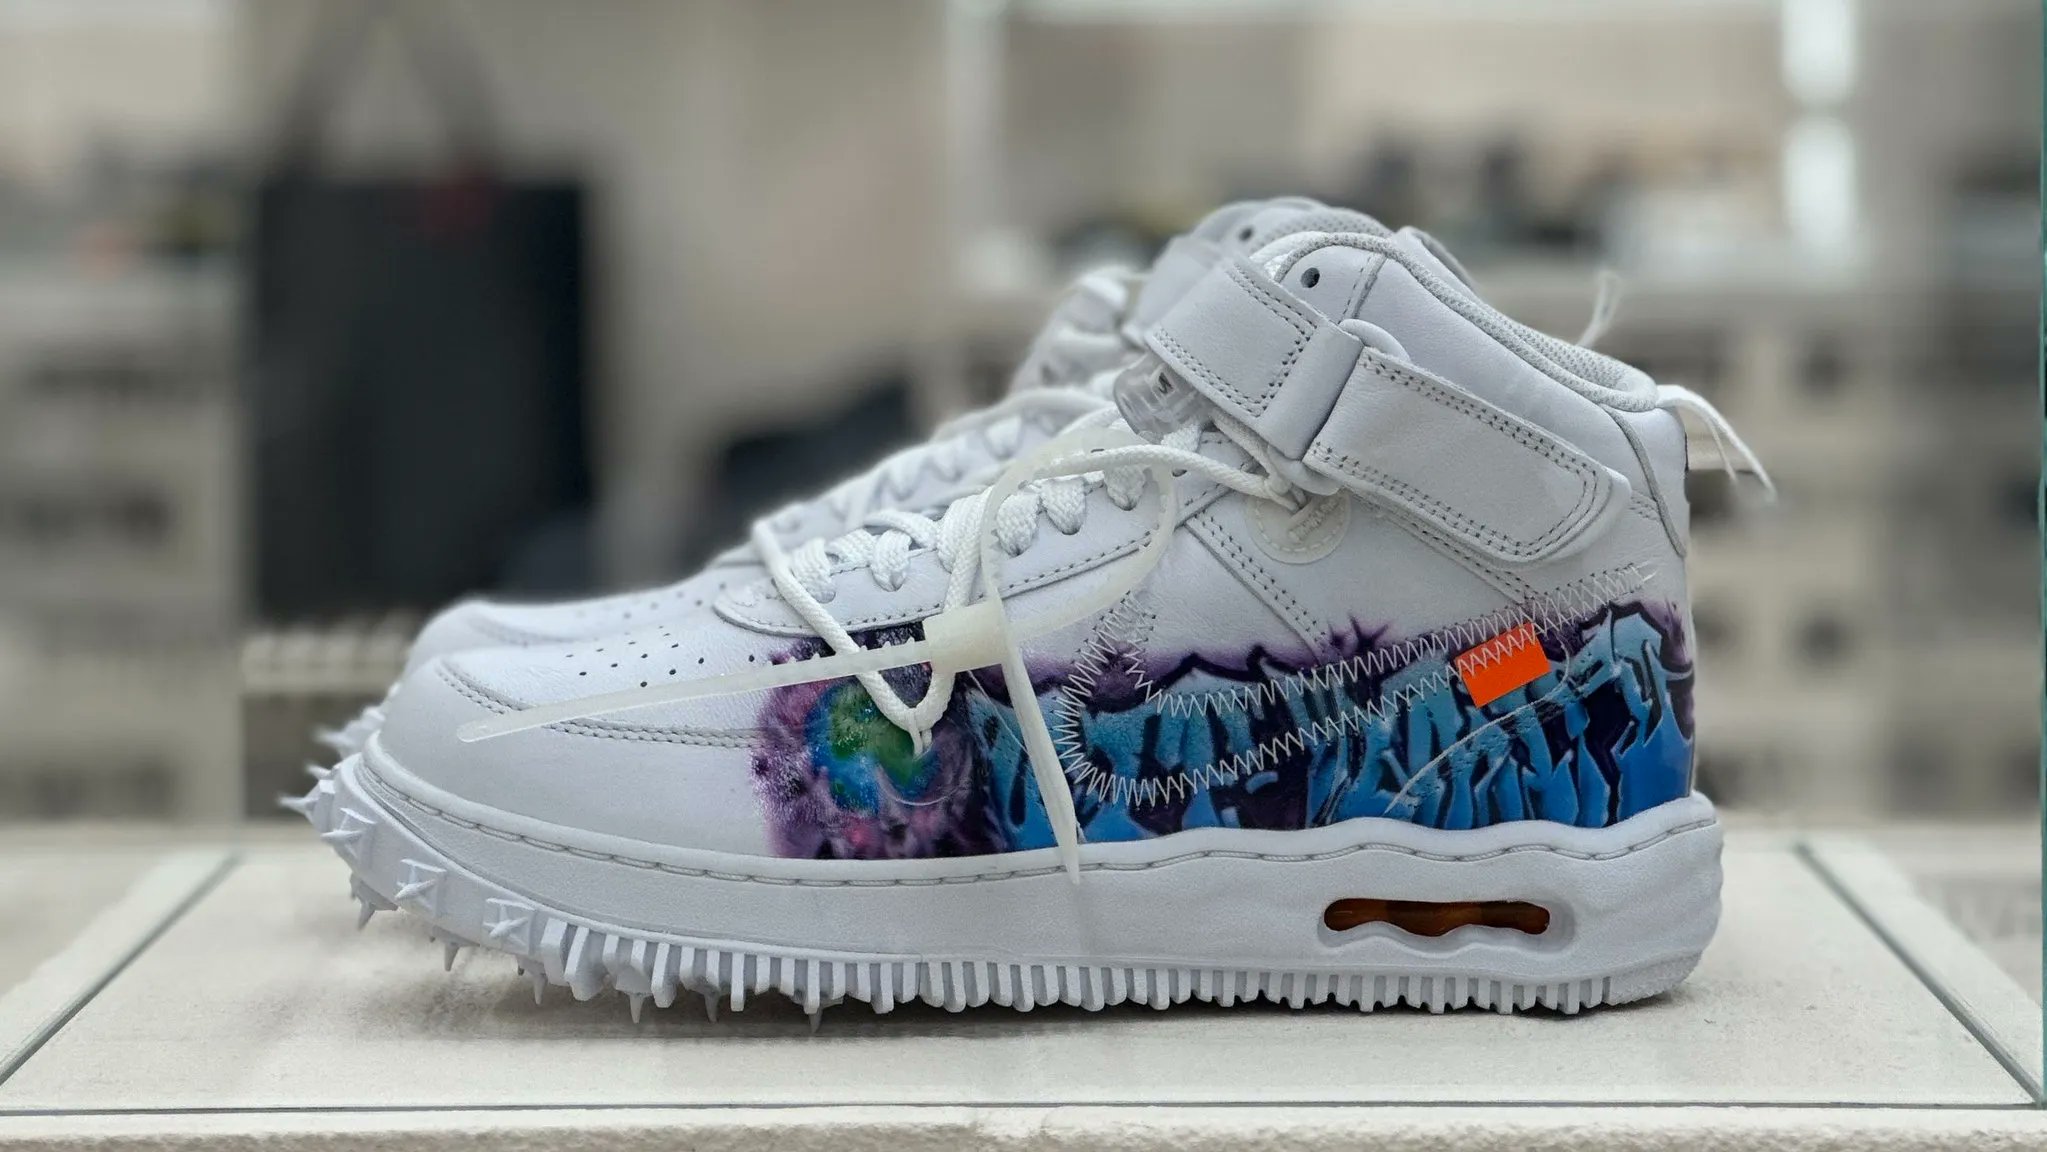 The Off-White x Nike Air Force 1 Mid 'Graffiti' Sneaker Is Out Now